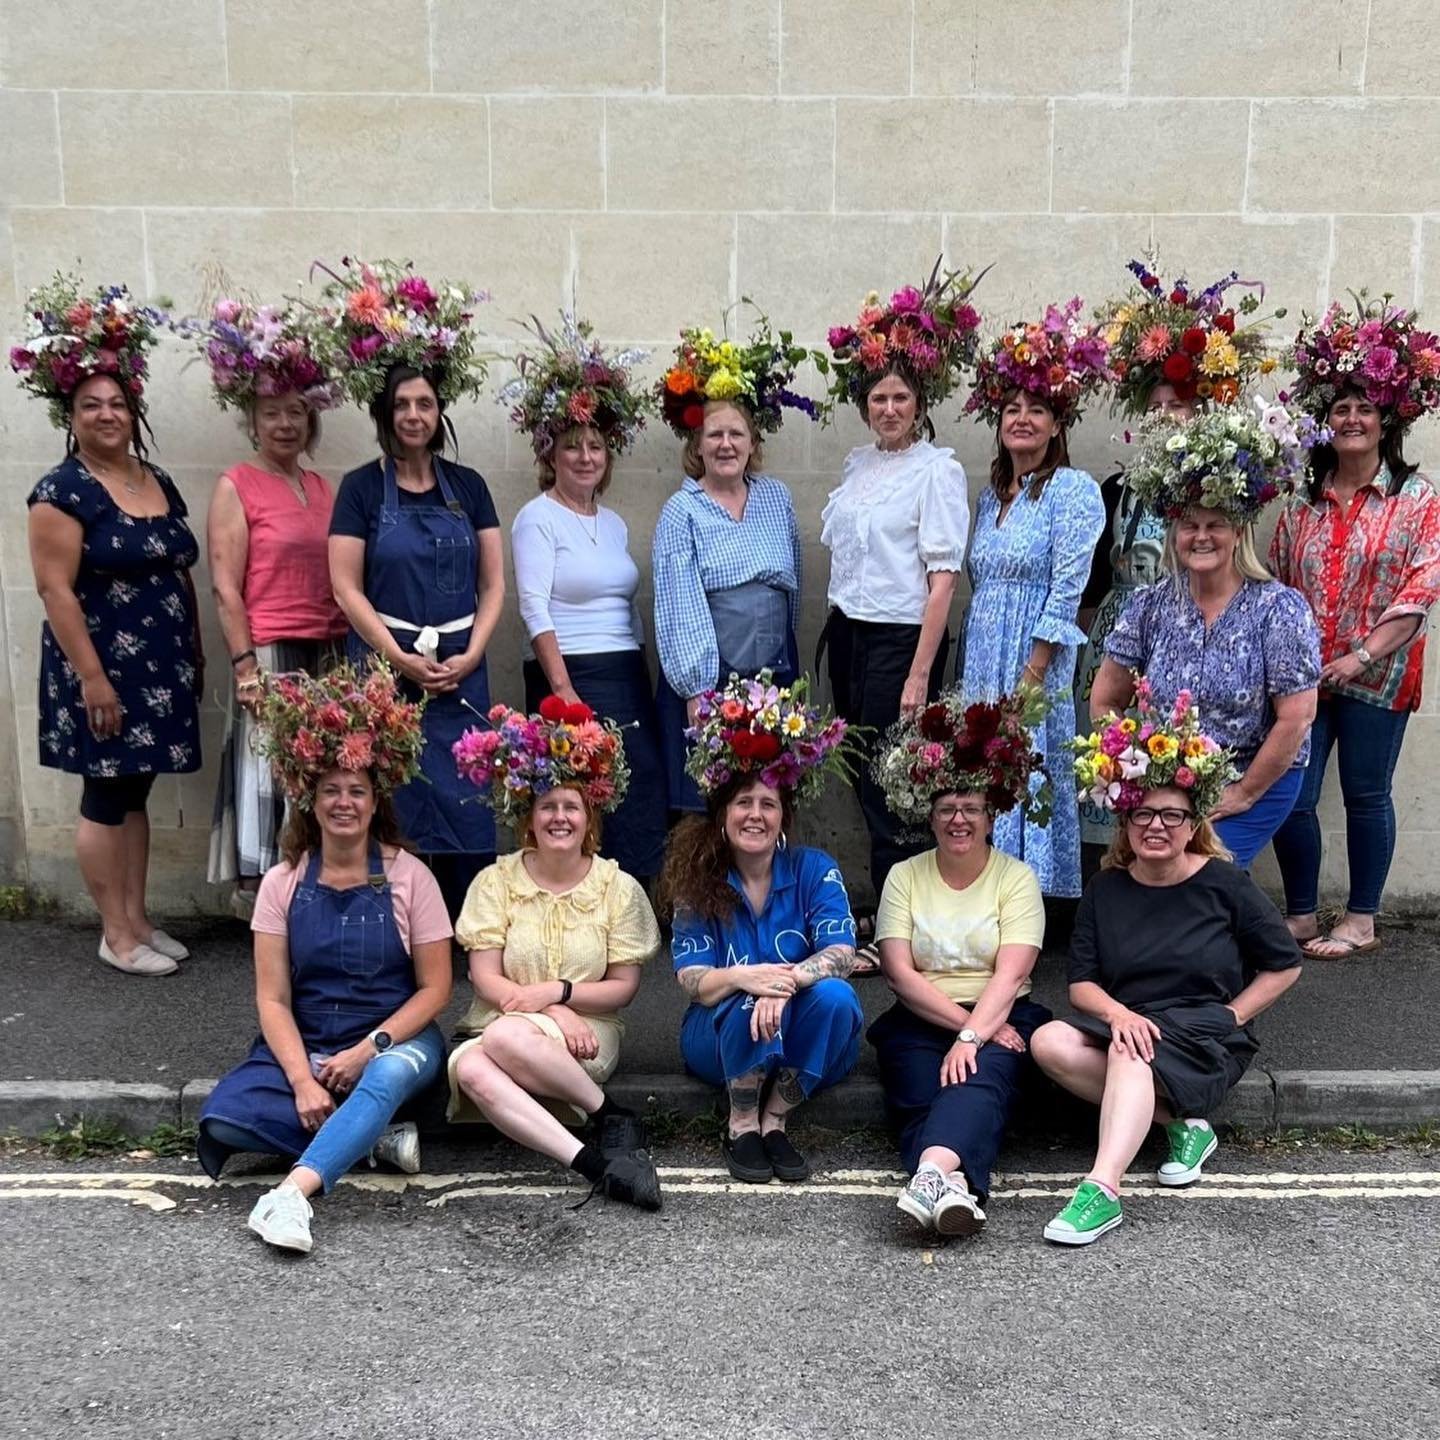 Celebrate British Flowers Week with The Bath Flower School!

For those unfamiliar with #britishflowersweek, it began in 2013 thanks to @marketflowers, aiming to shine a spotlight on UK-grown flowers and uplift growers, wholesalers, and florists. Now,